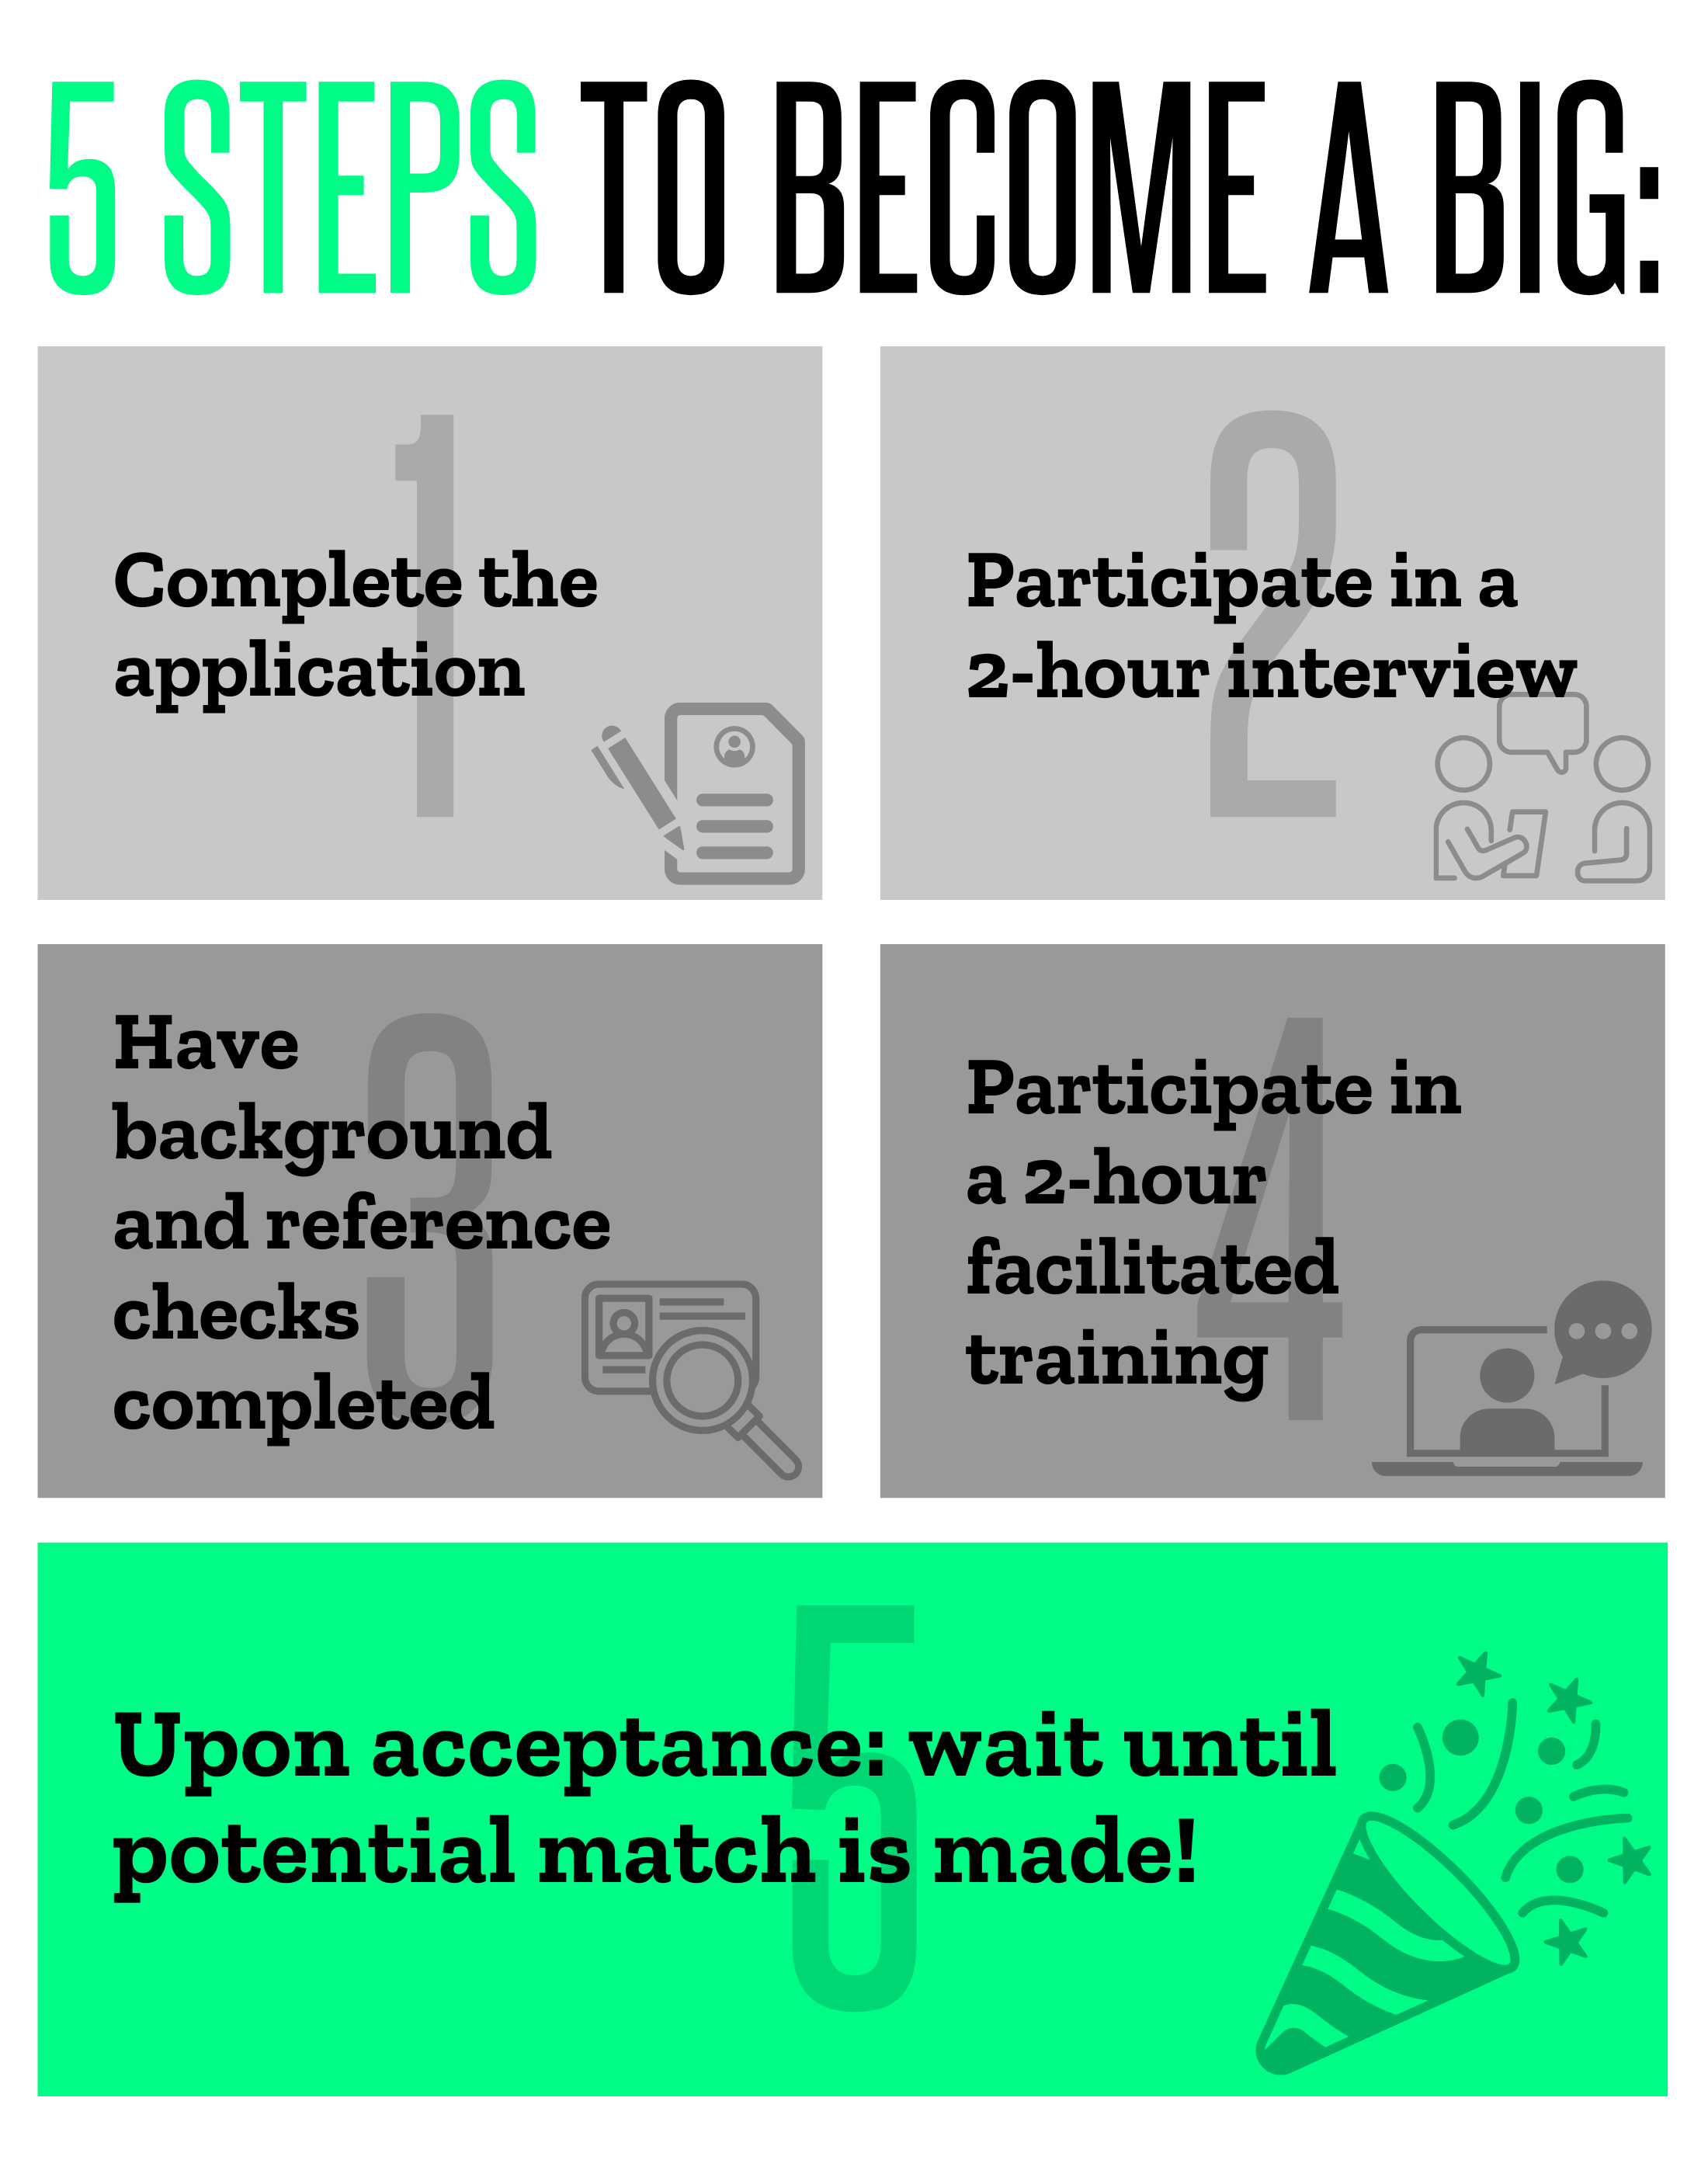 5 steps to become a Big: 1. Complete the application 2. Participate in a 2-hour interview 3. Have background and reference checks completed 4. Participate in a 2-hour facilitated training 5. Upon acceptance: wait until potential match is made!